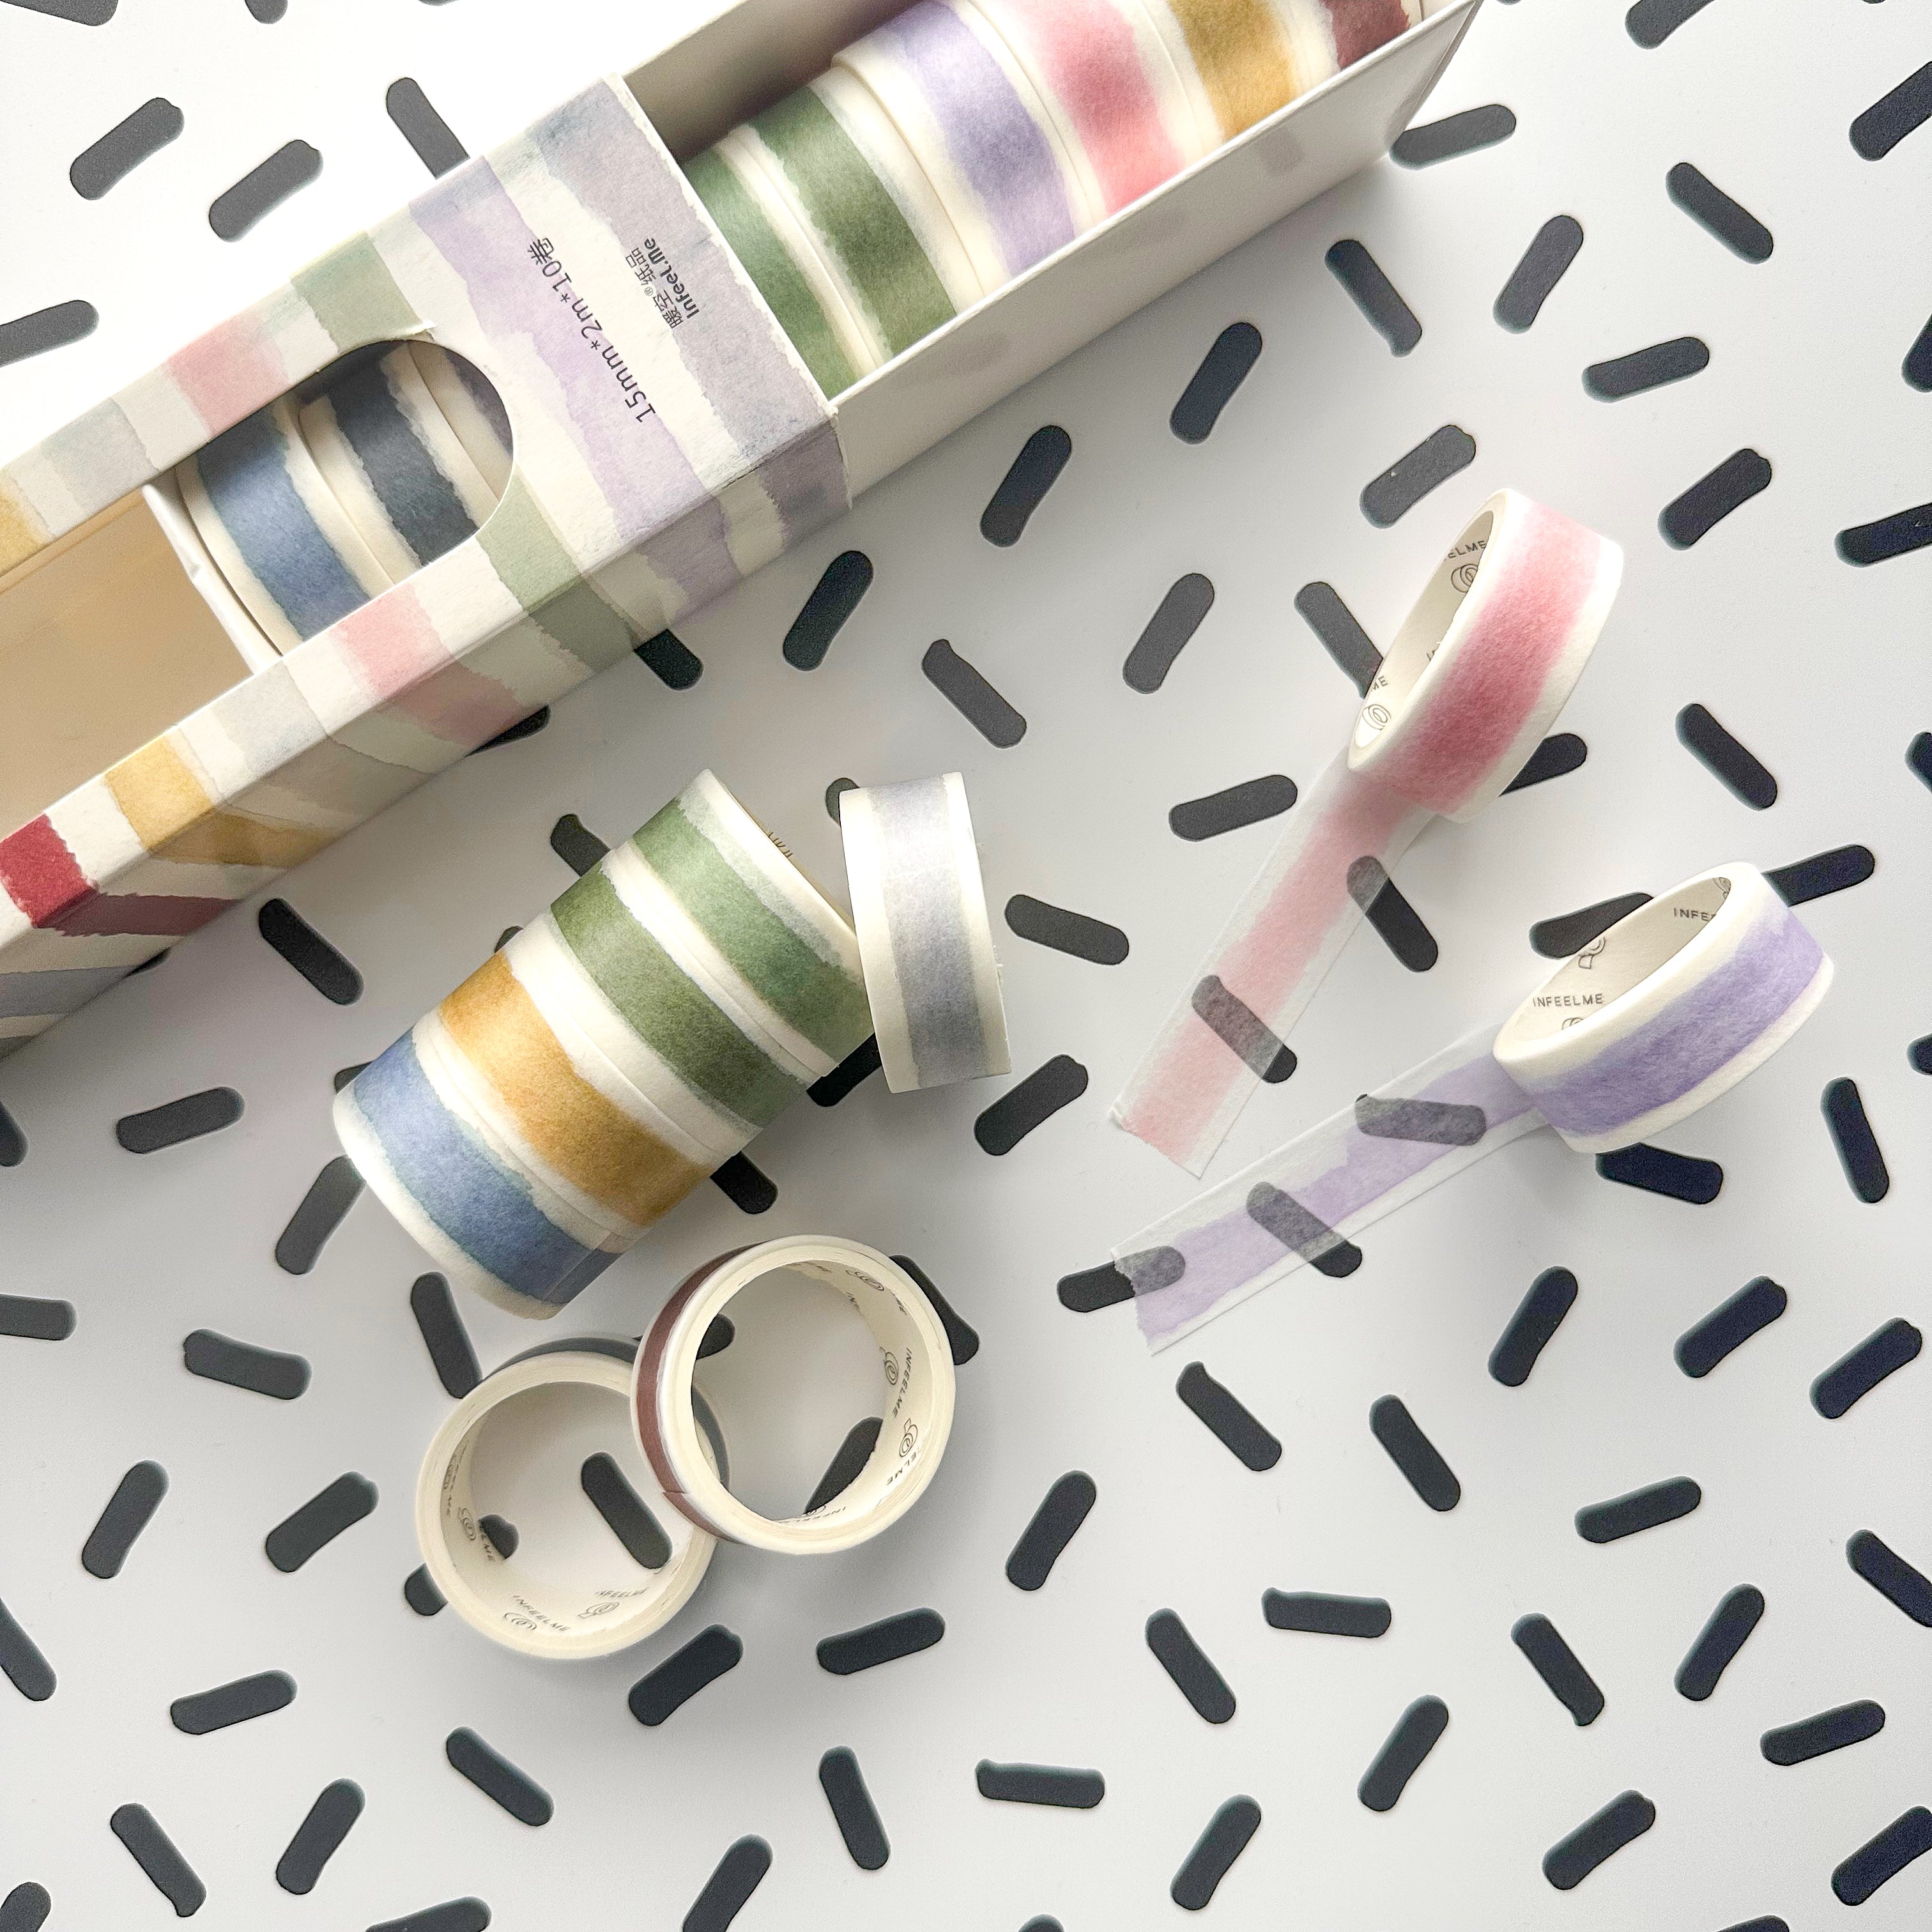 Get creative with our collection of 10 watercolor washi tapes in a beautiful rainbow palette, ideal for scrapbooking, journaling, and DIY crafts. These are especially perfect for easy banners on your spread. This collection is sold at BBB Supplies Craft Shop.